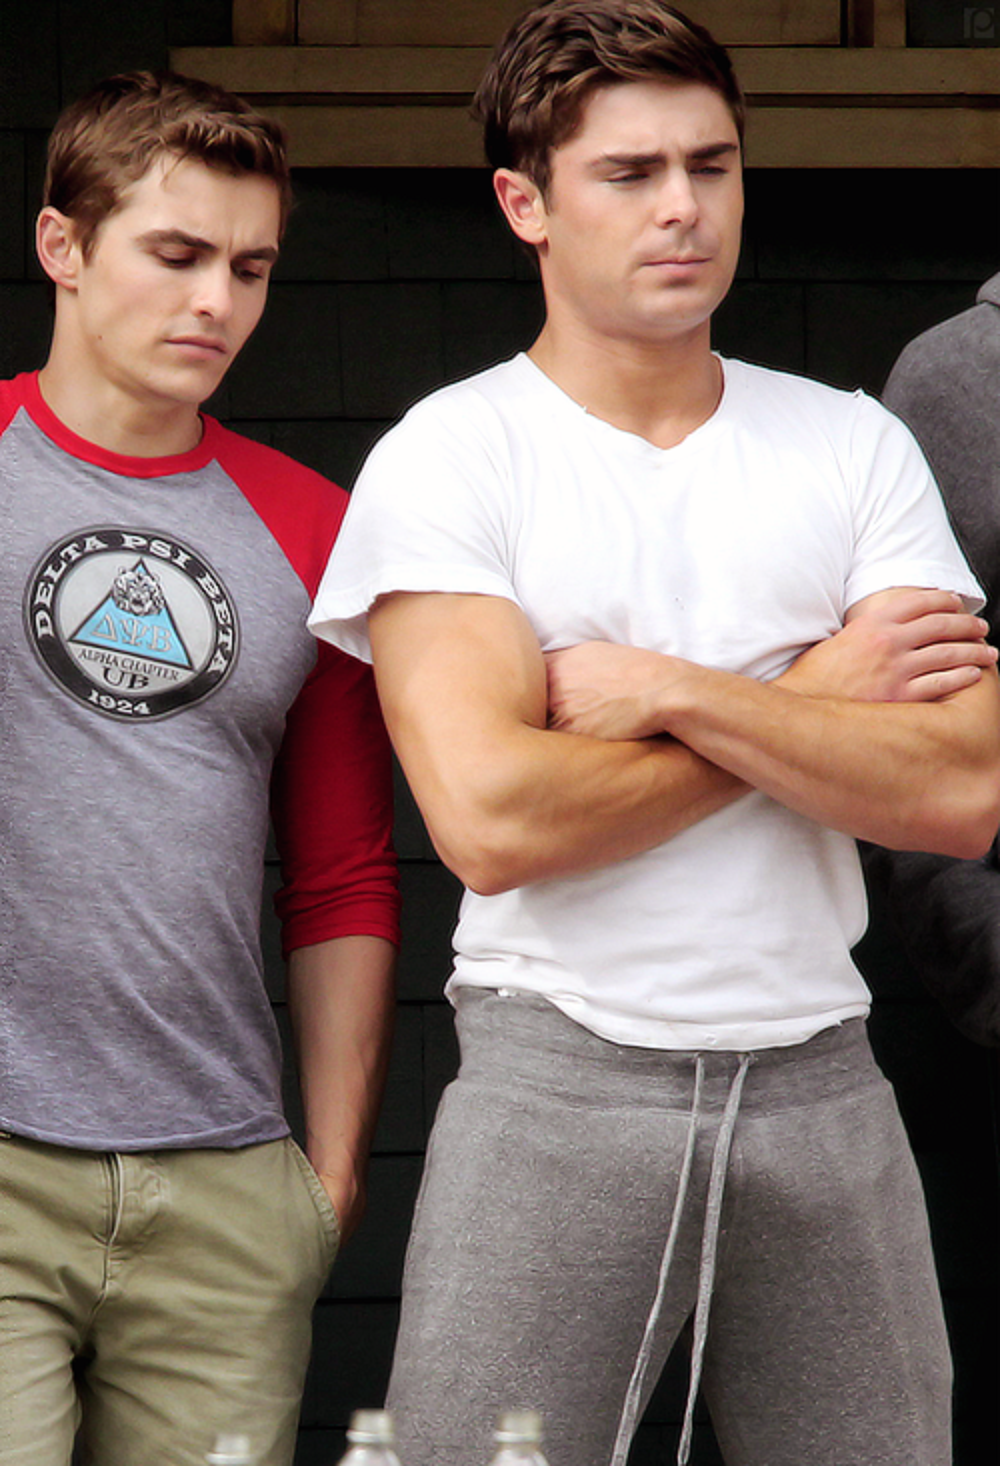 Dave Franco looks too at Zac Efron's muscle ass! 